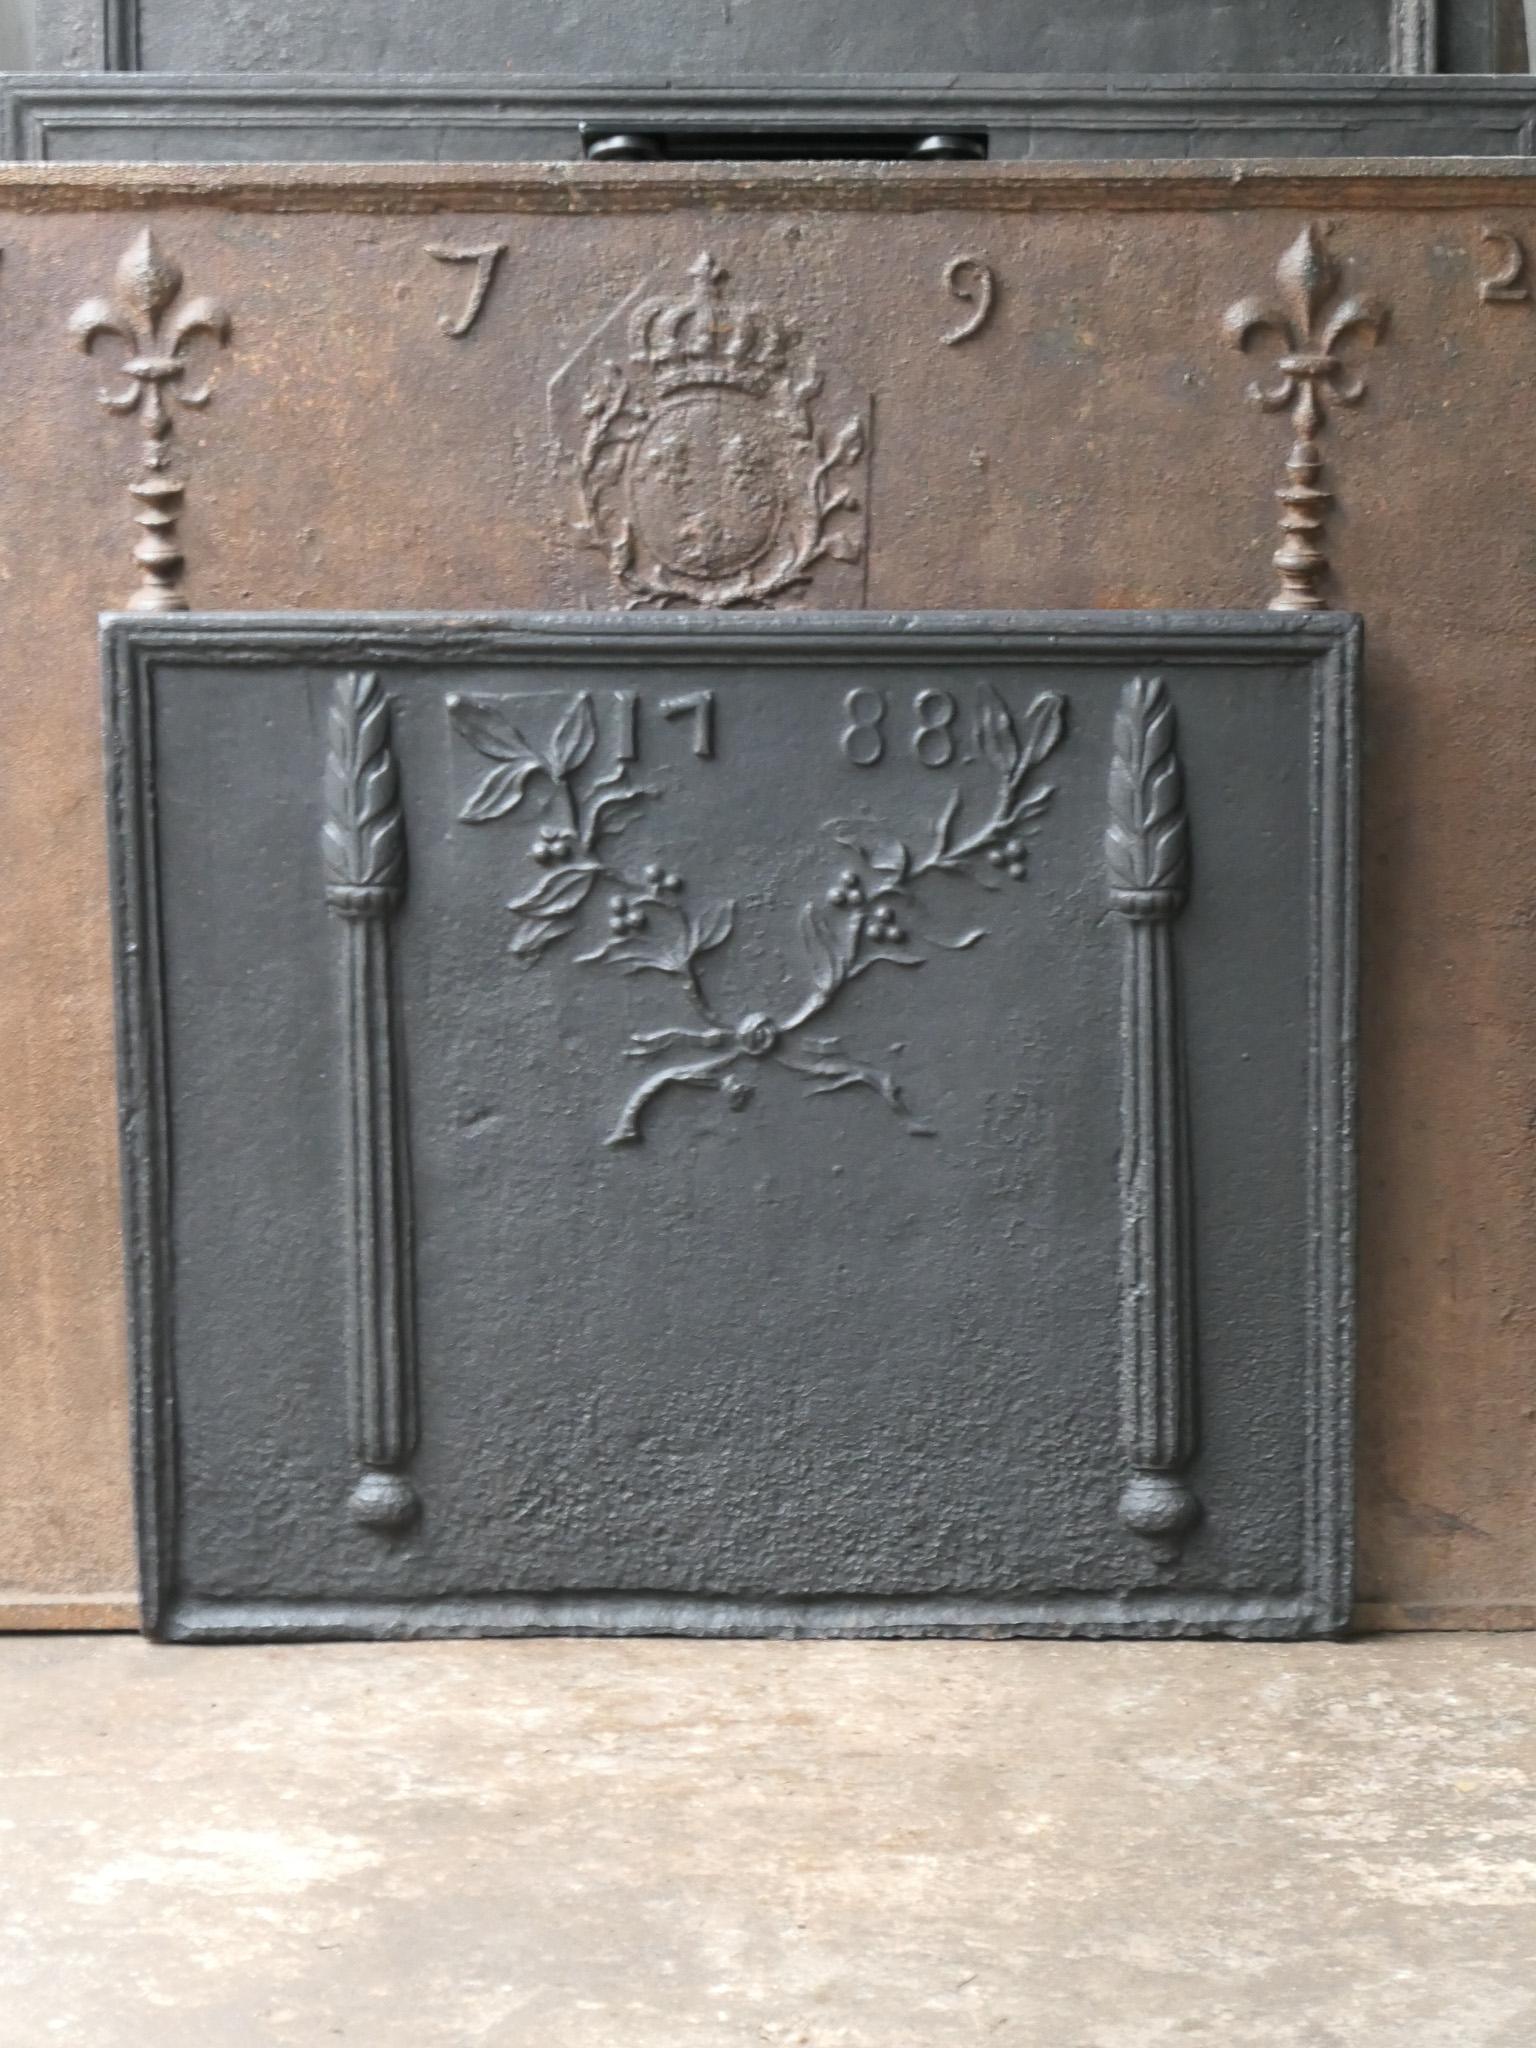 French Louis XV period fireback with two pillars, branches of the olive tree (symbolizing peace) and the date of production 1788.

The fireback is made of cast iron and has a black patina. It is in a good condition and does not have cracks.